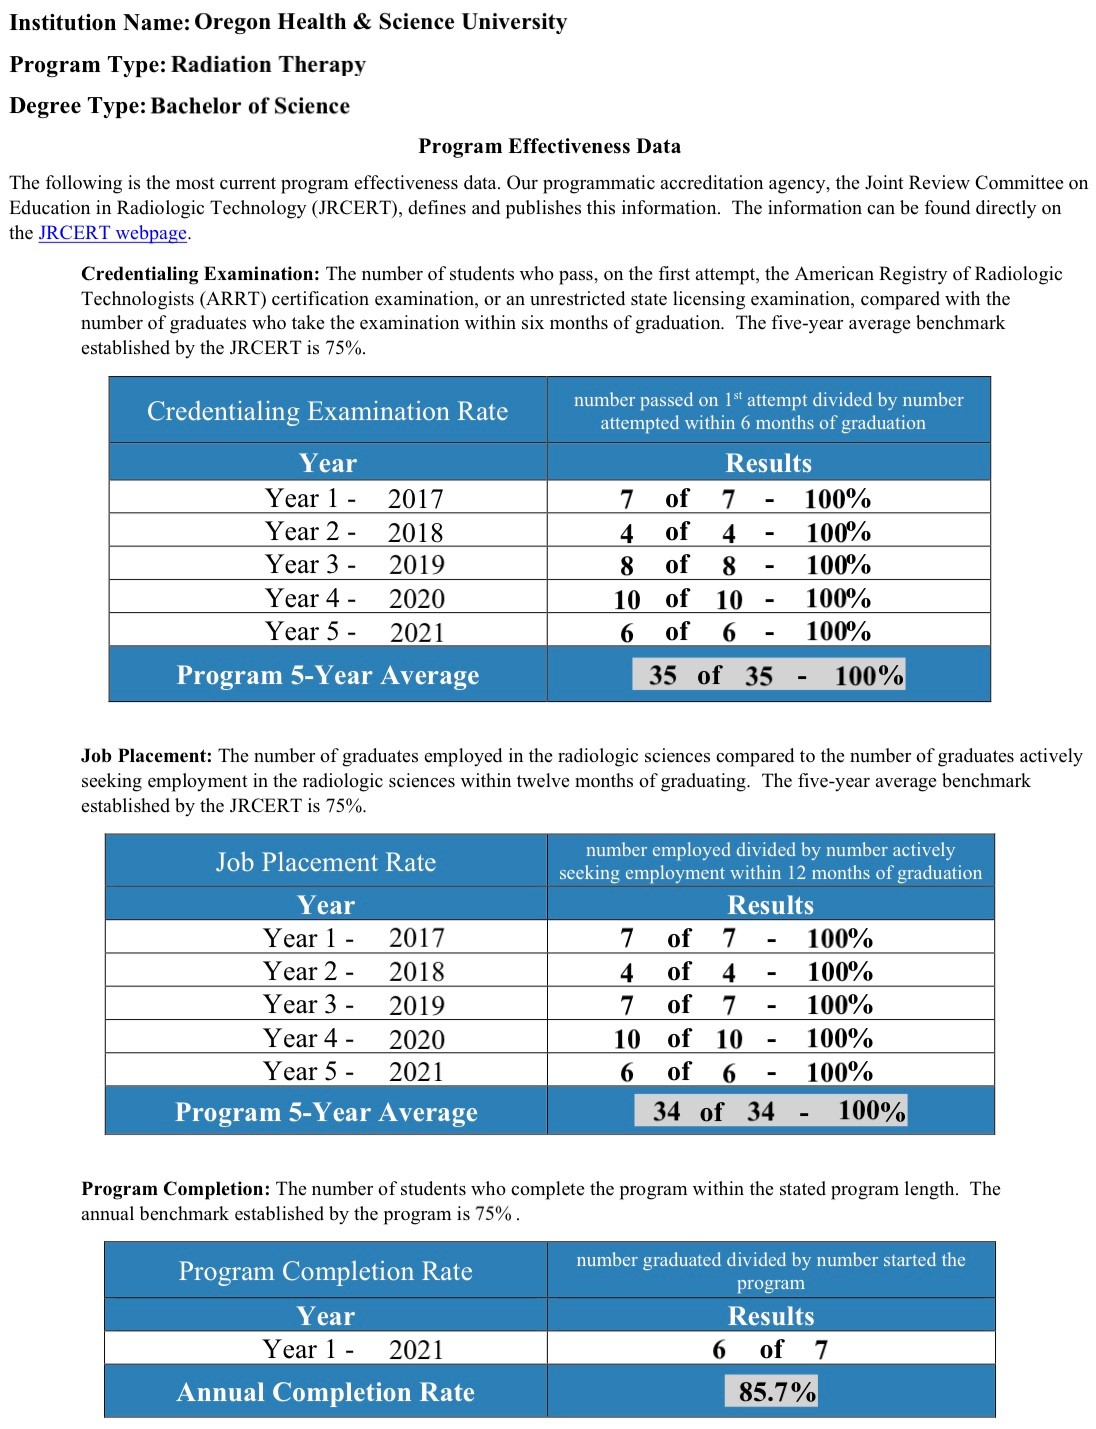 Overview of Program Effectiveness Data from years 2017 to 2021